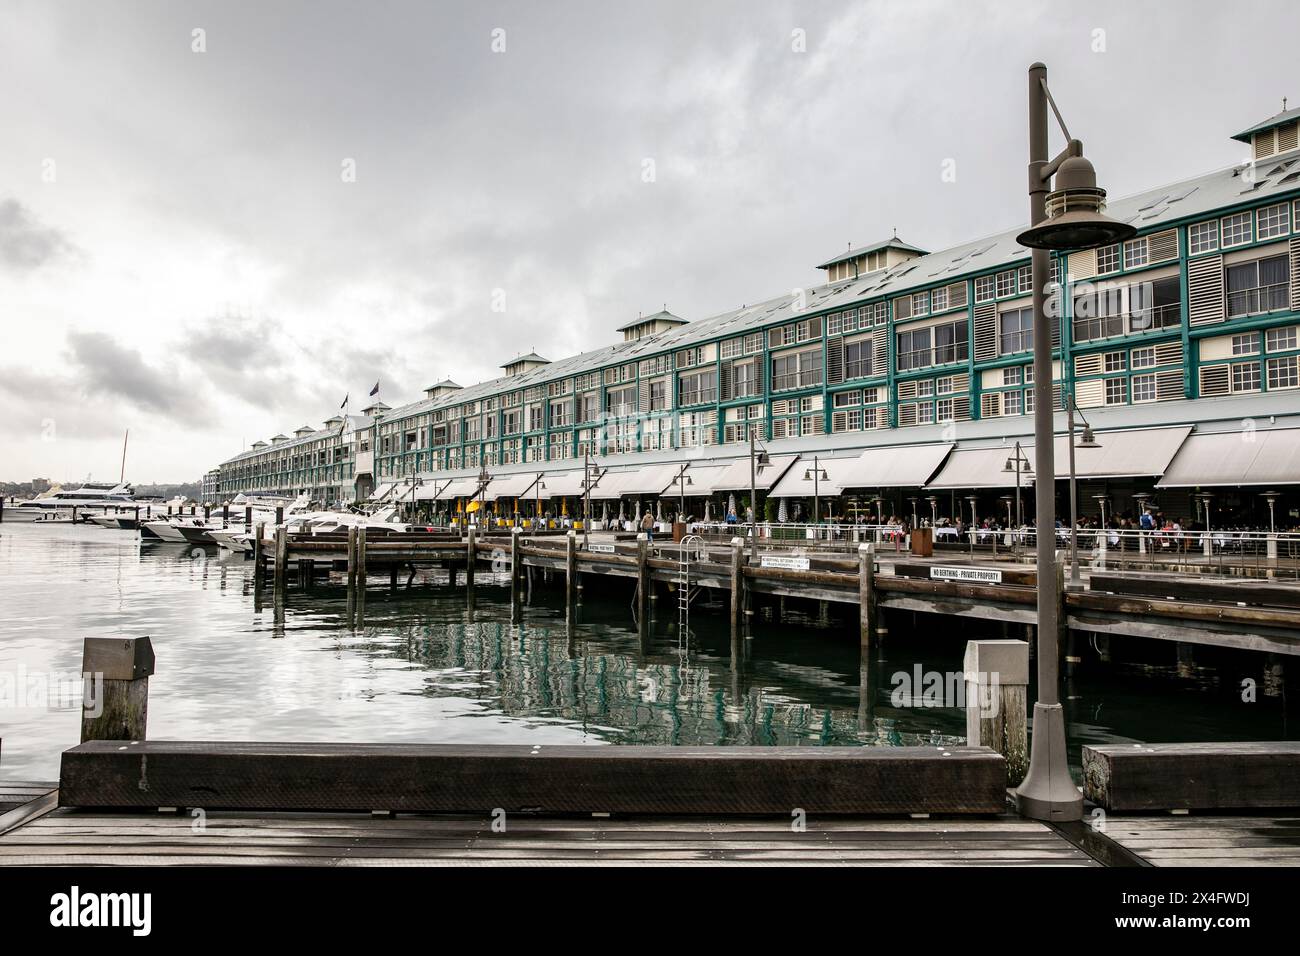 Woolloomooloo wharf aka The Finger Wharf is the longest timbered-piled wharf in the world, and is heritage listed,Sydney,NSW,Australia Stock Photo